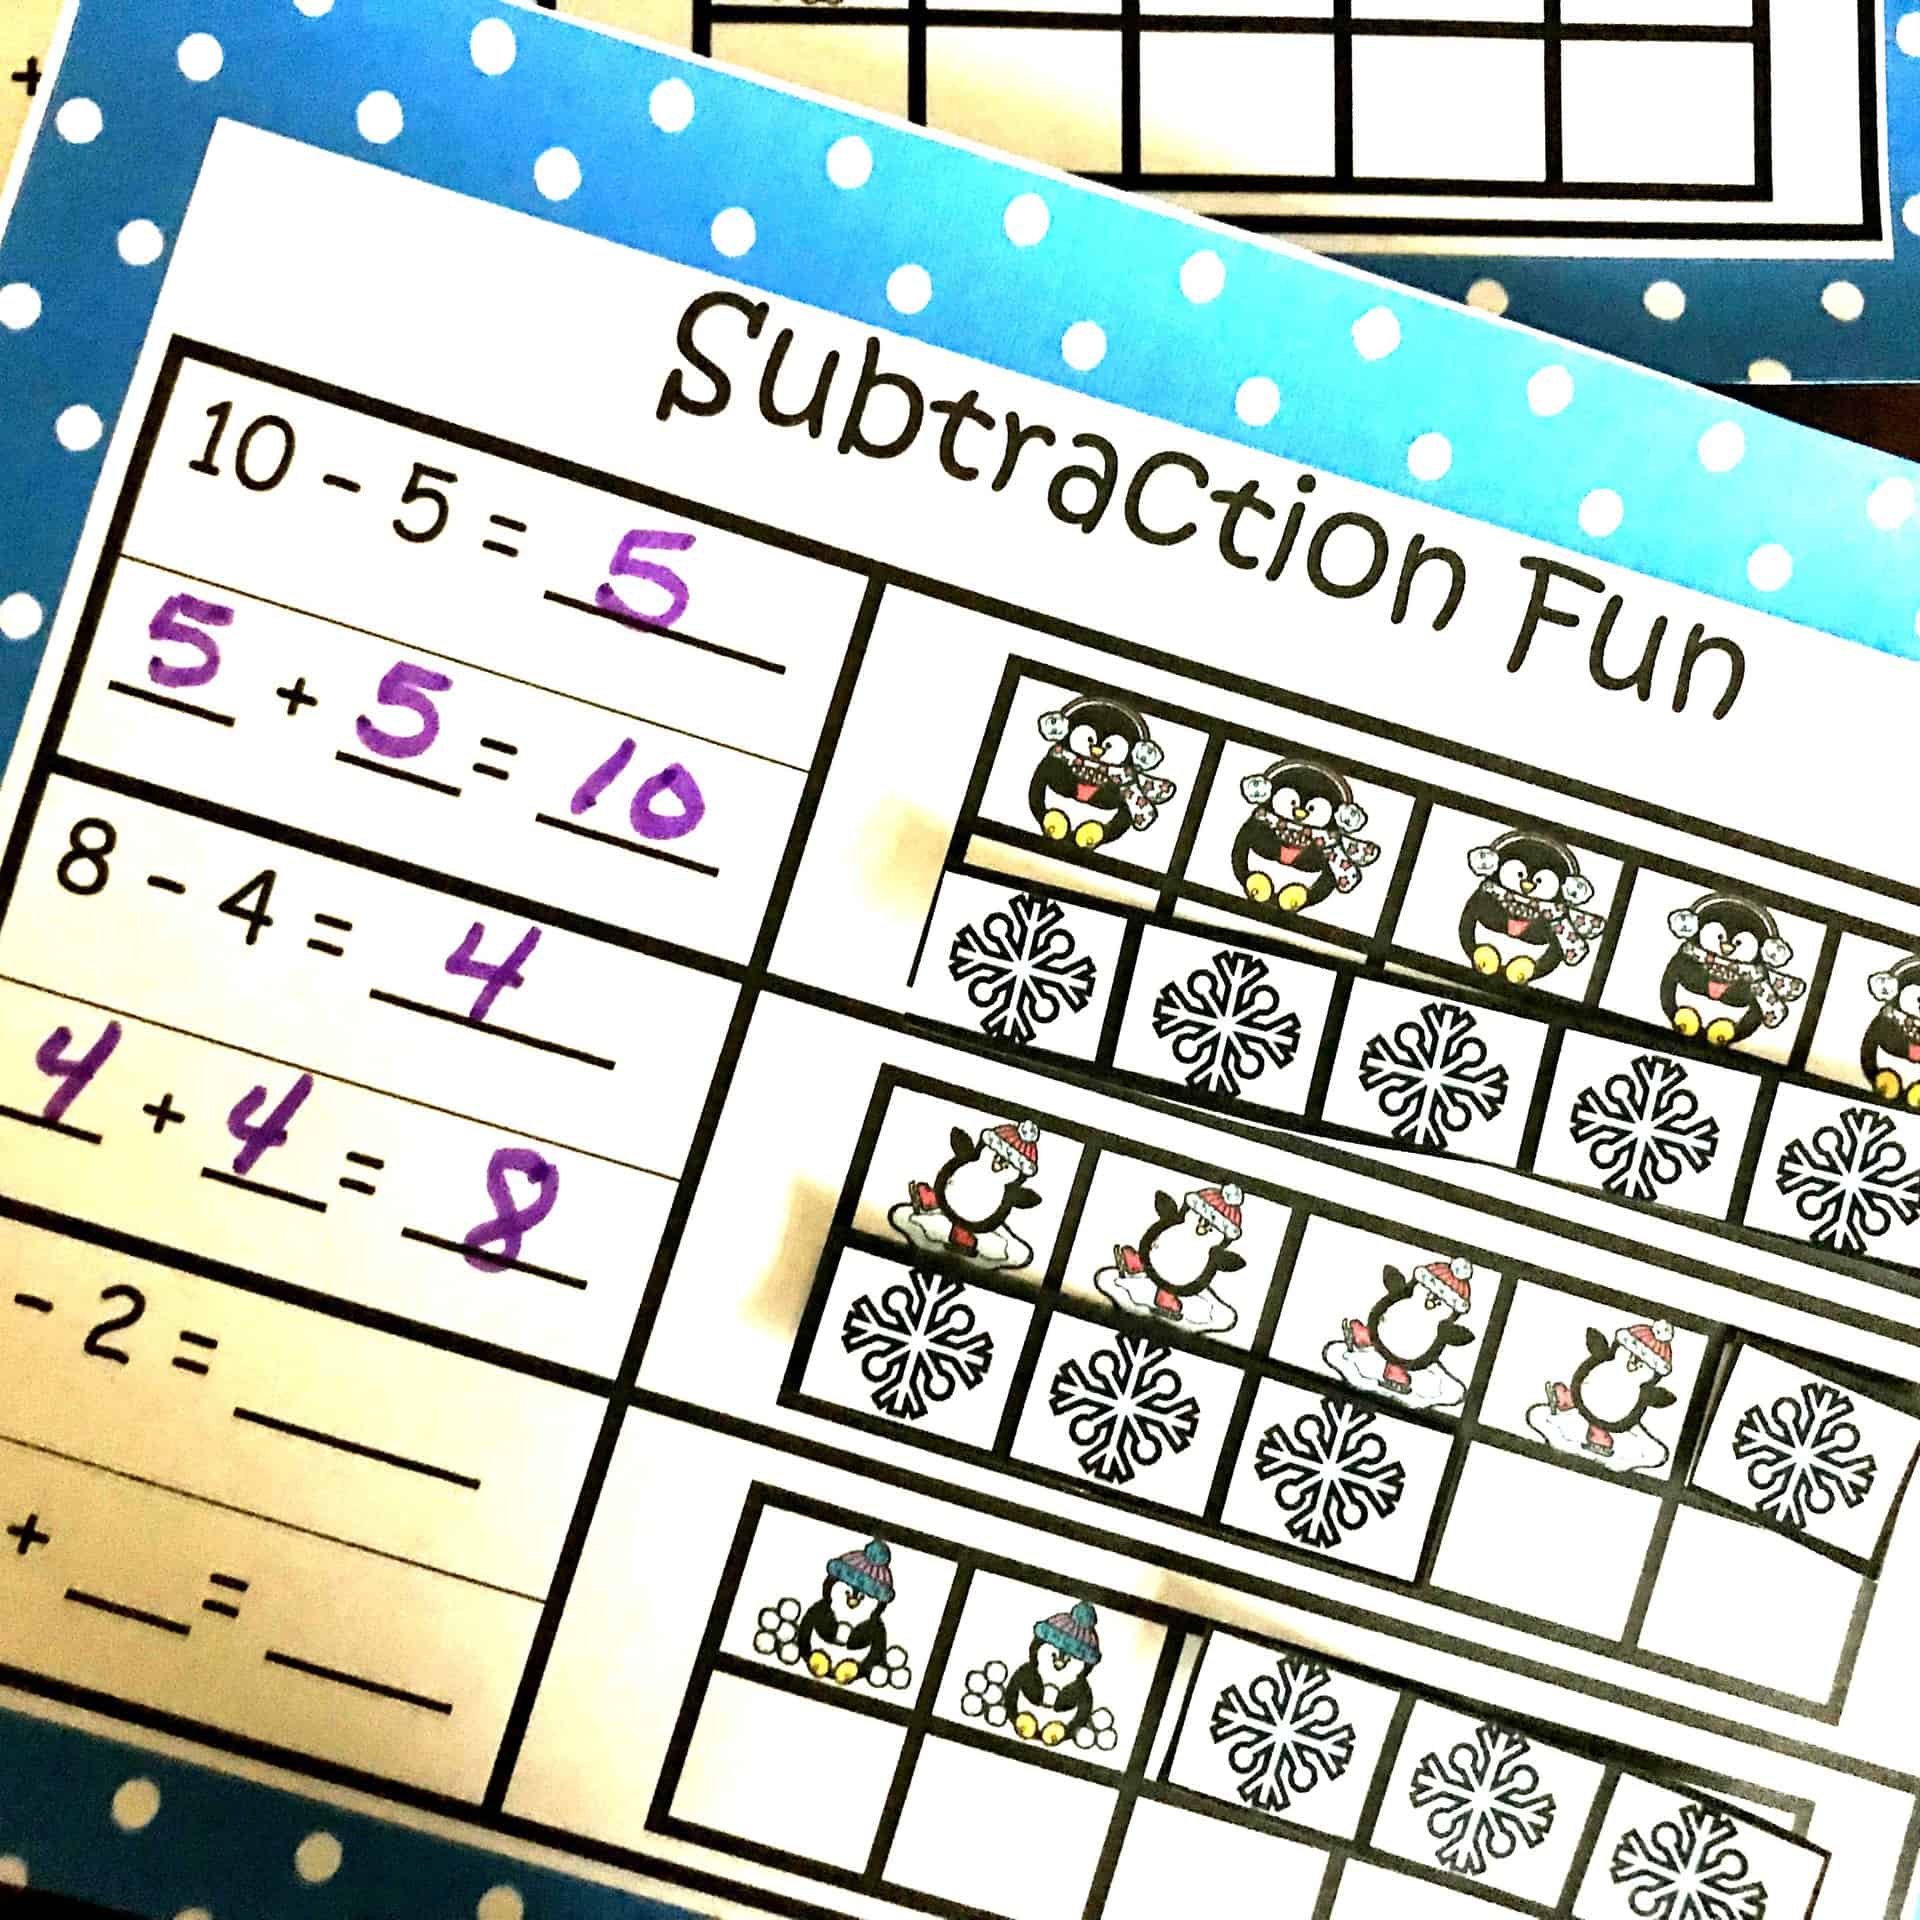 Find the Missing Addend in a Subtraction Problem Cut and Paste Activity